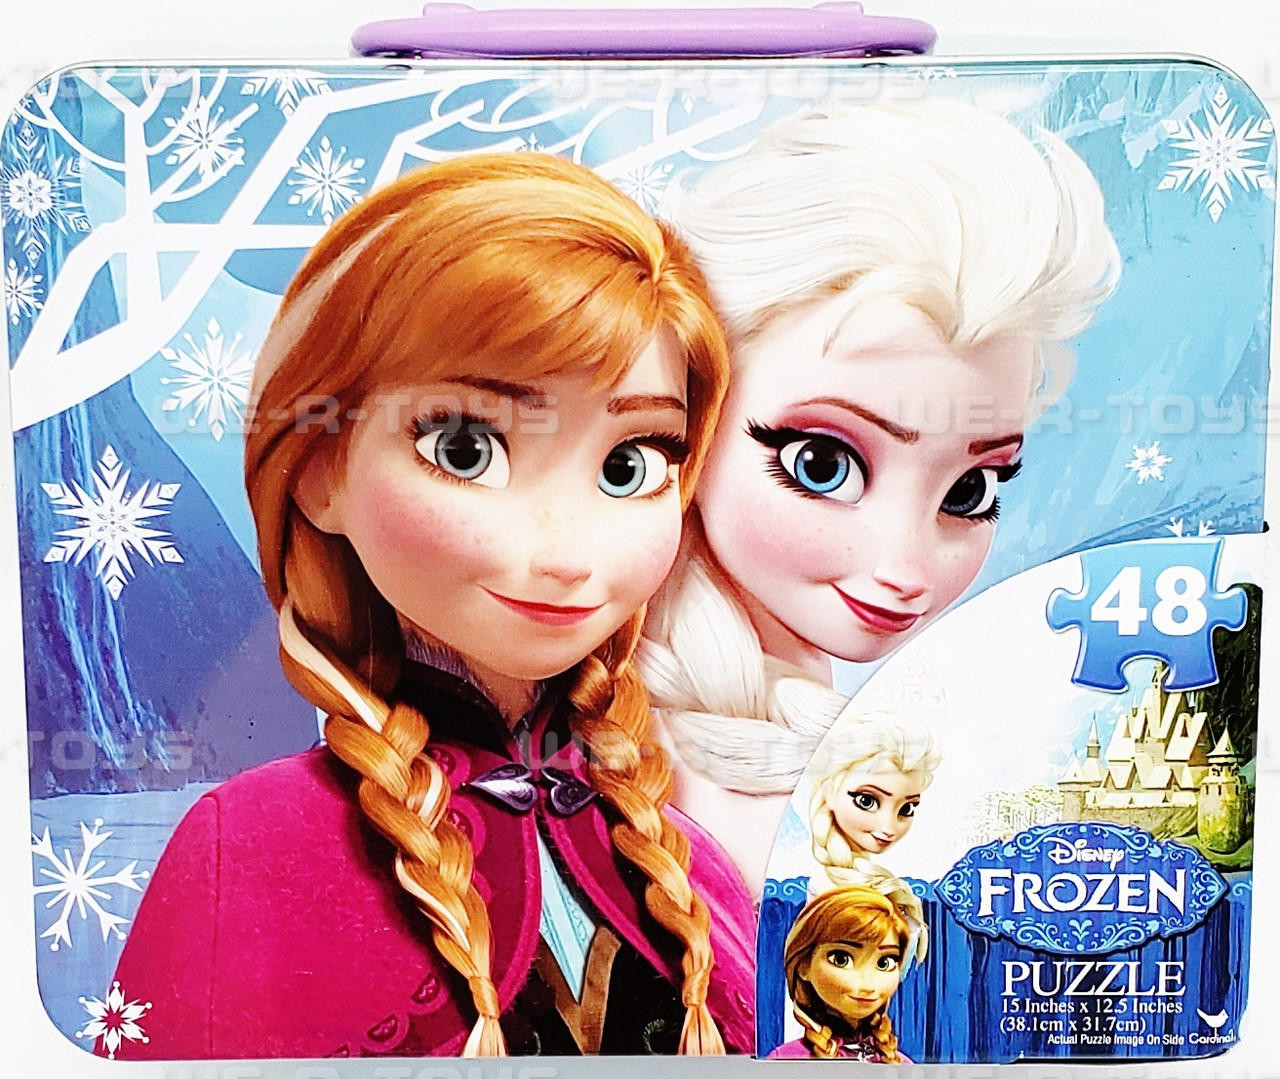 https://cdn11.bigcommerce.com/s-cy4lua1xoh/images/stencil/1280x1280/products/26918/232440/disney-frozen-puzzle-with-lunchbox-case-cardinal-games-28849-new__31827.1689713329.jpg?c=1?imbypass=on